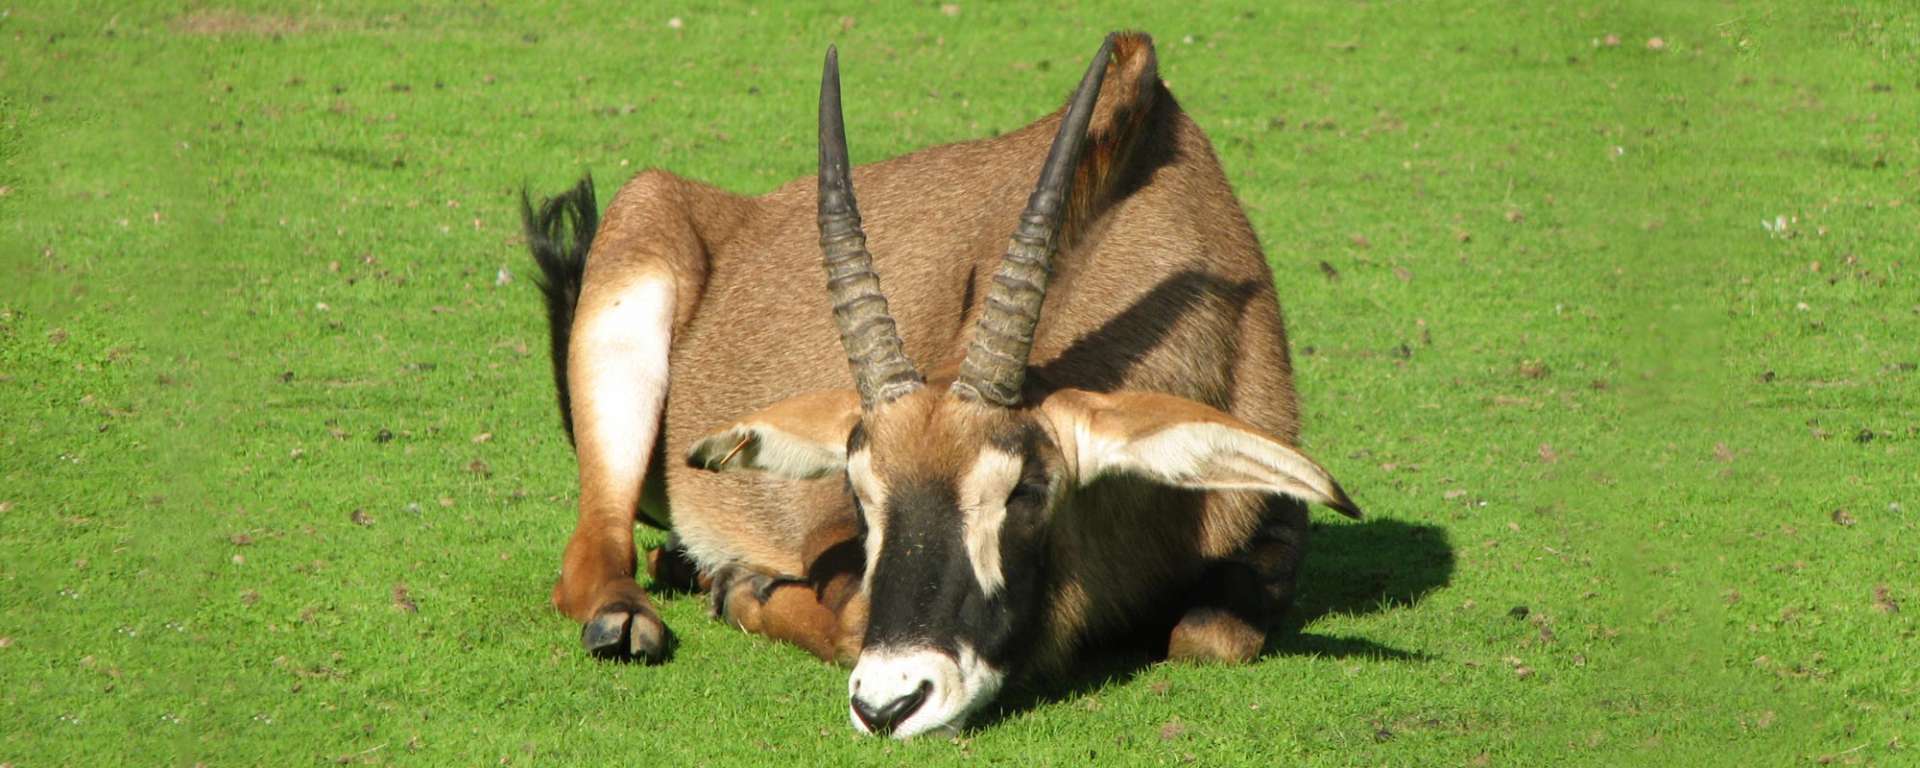 Guide to a Good Night's Sleep with a Roan Antelope